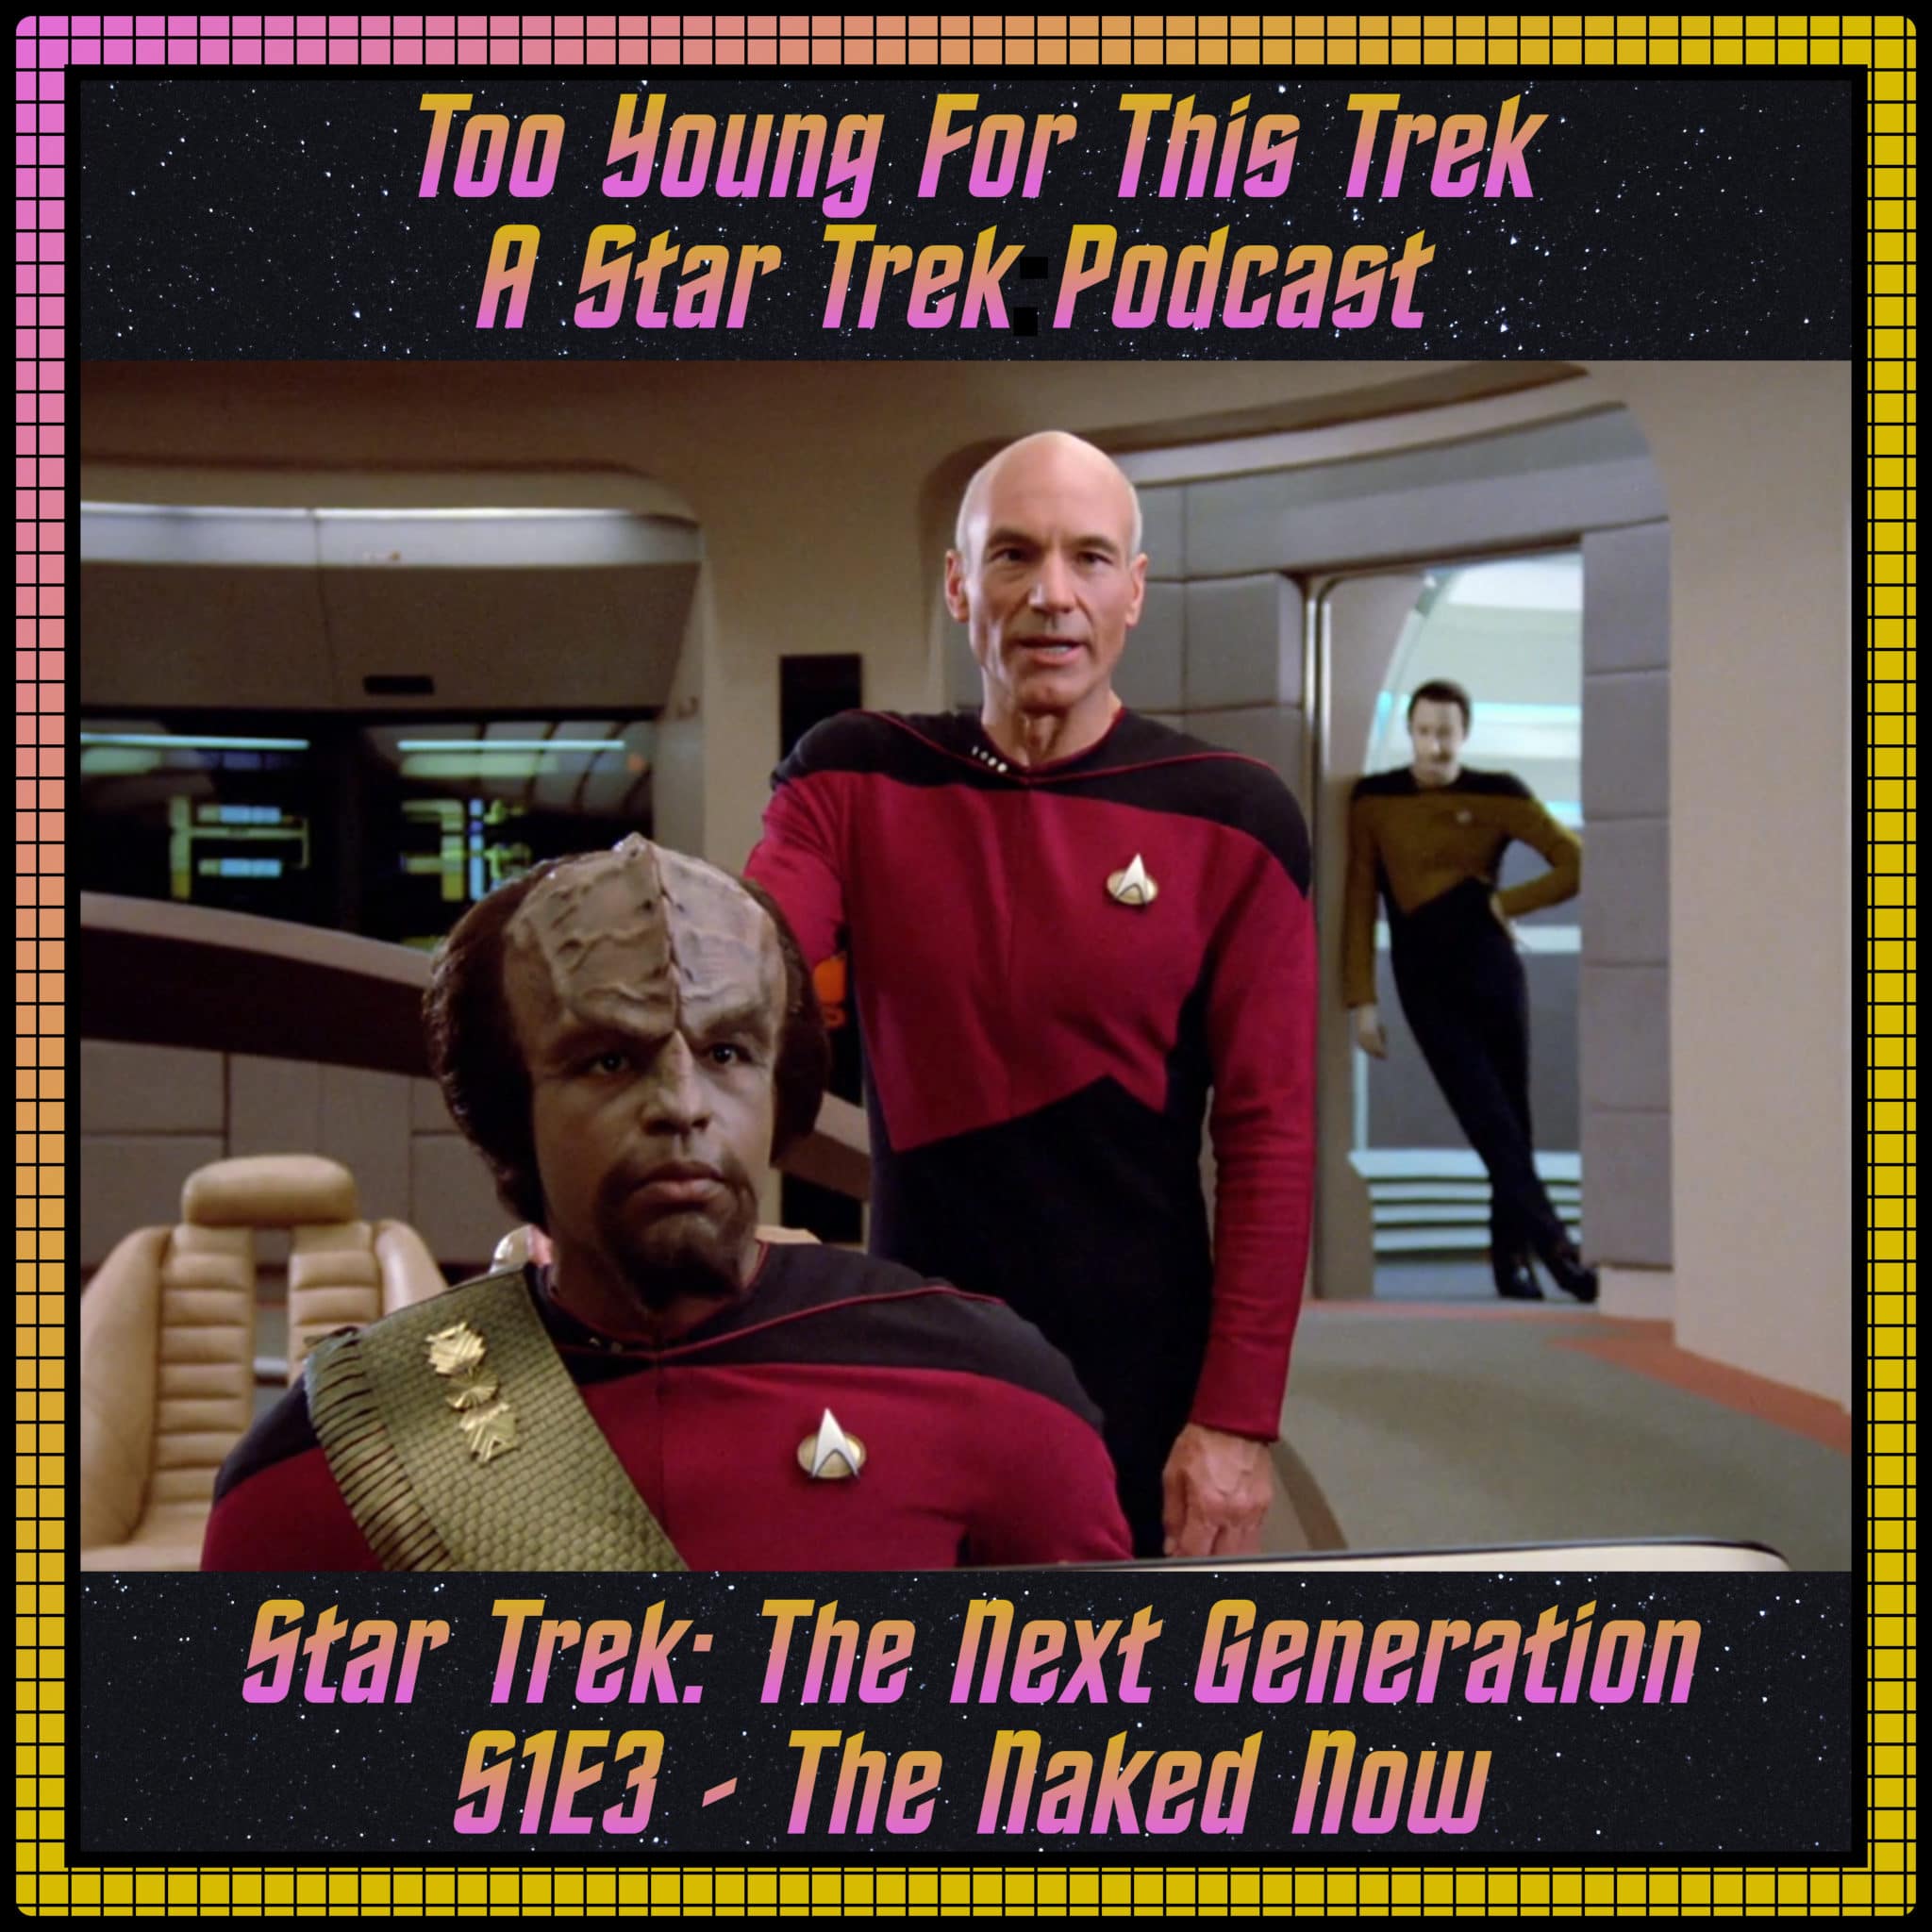 Star Trek: The Next Generation S1E3 - The Naked Now